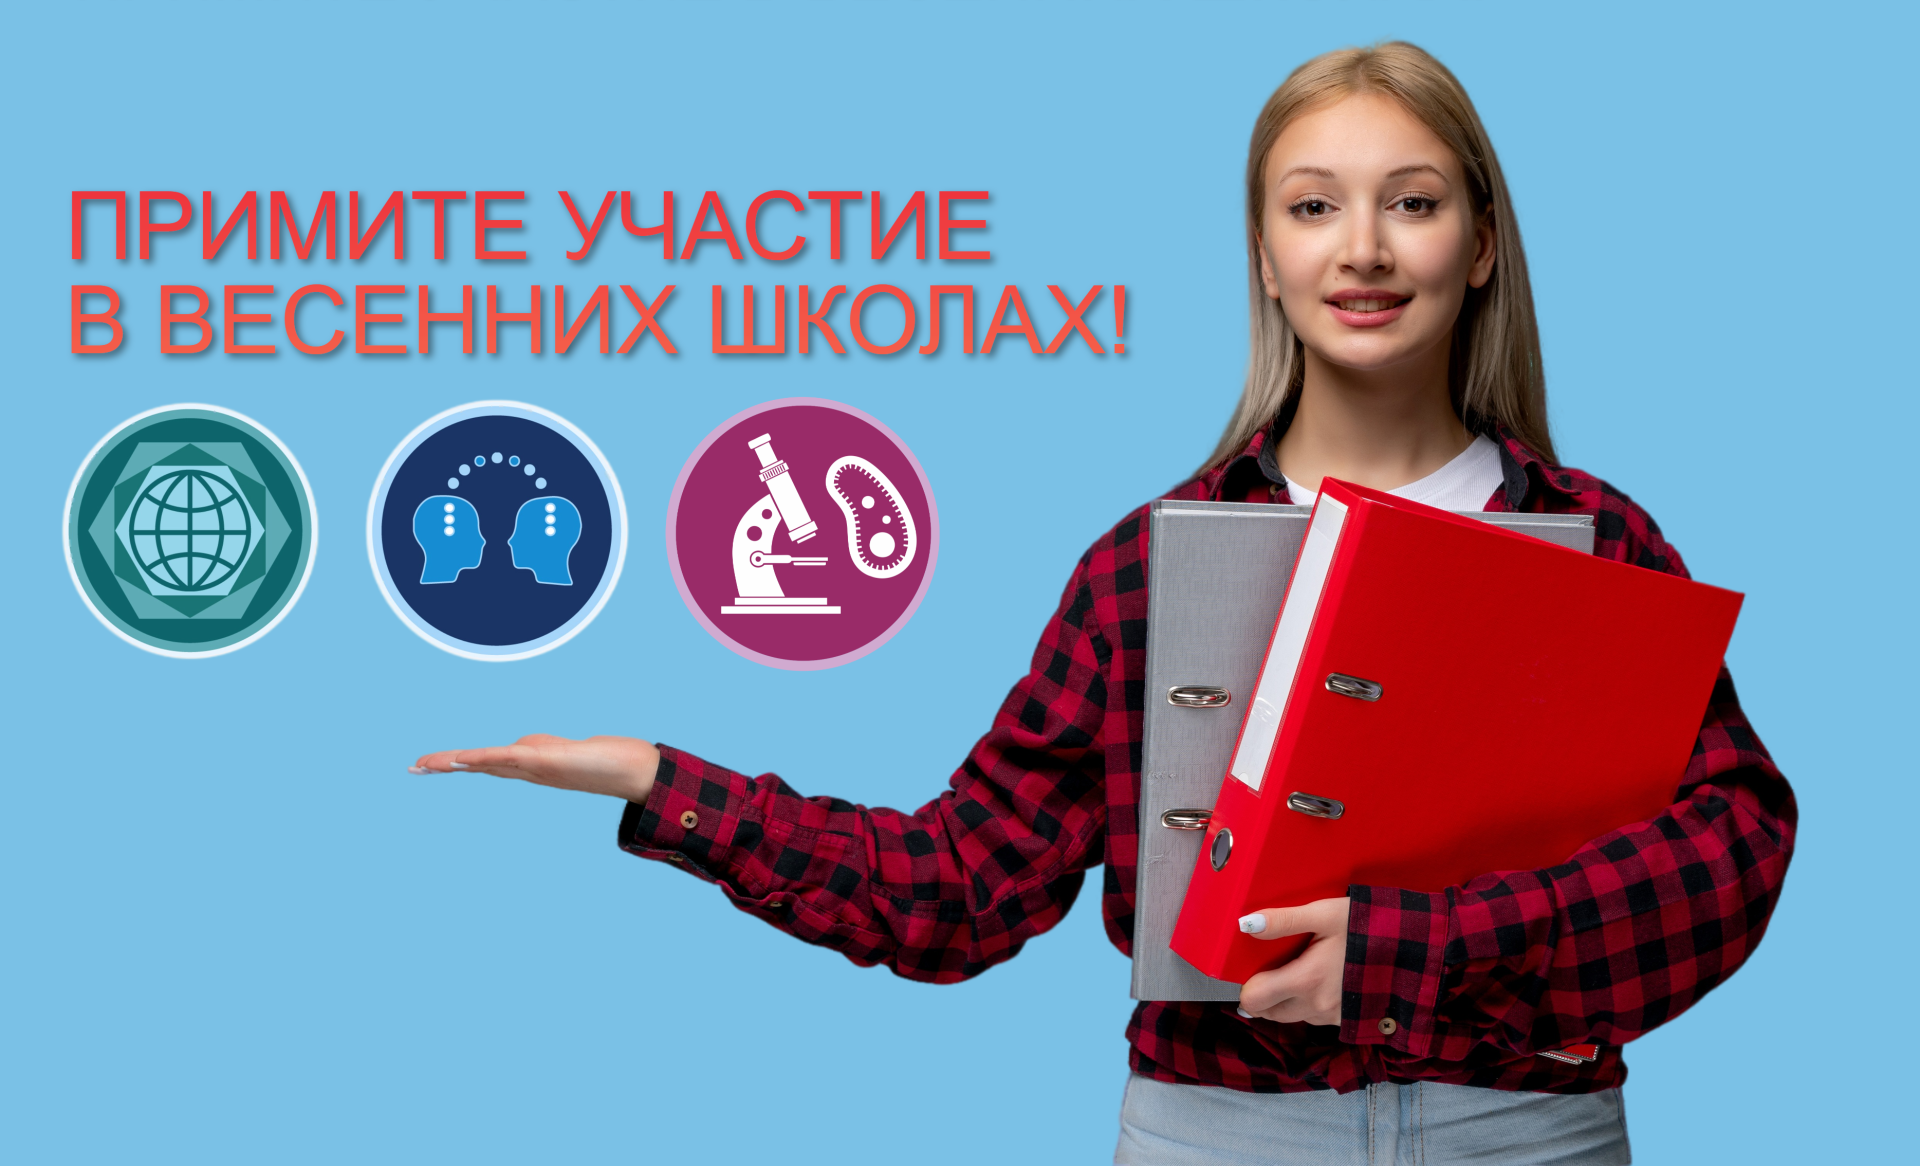 international-students-day-young-cute-girl-in-red-checked-shirt-happily-holding-file-folders_(3)-transformed (2) (1) (1) (1).png